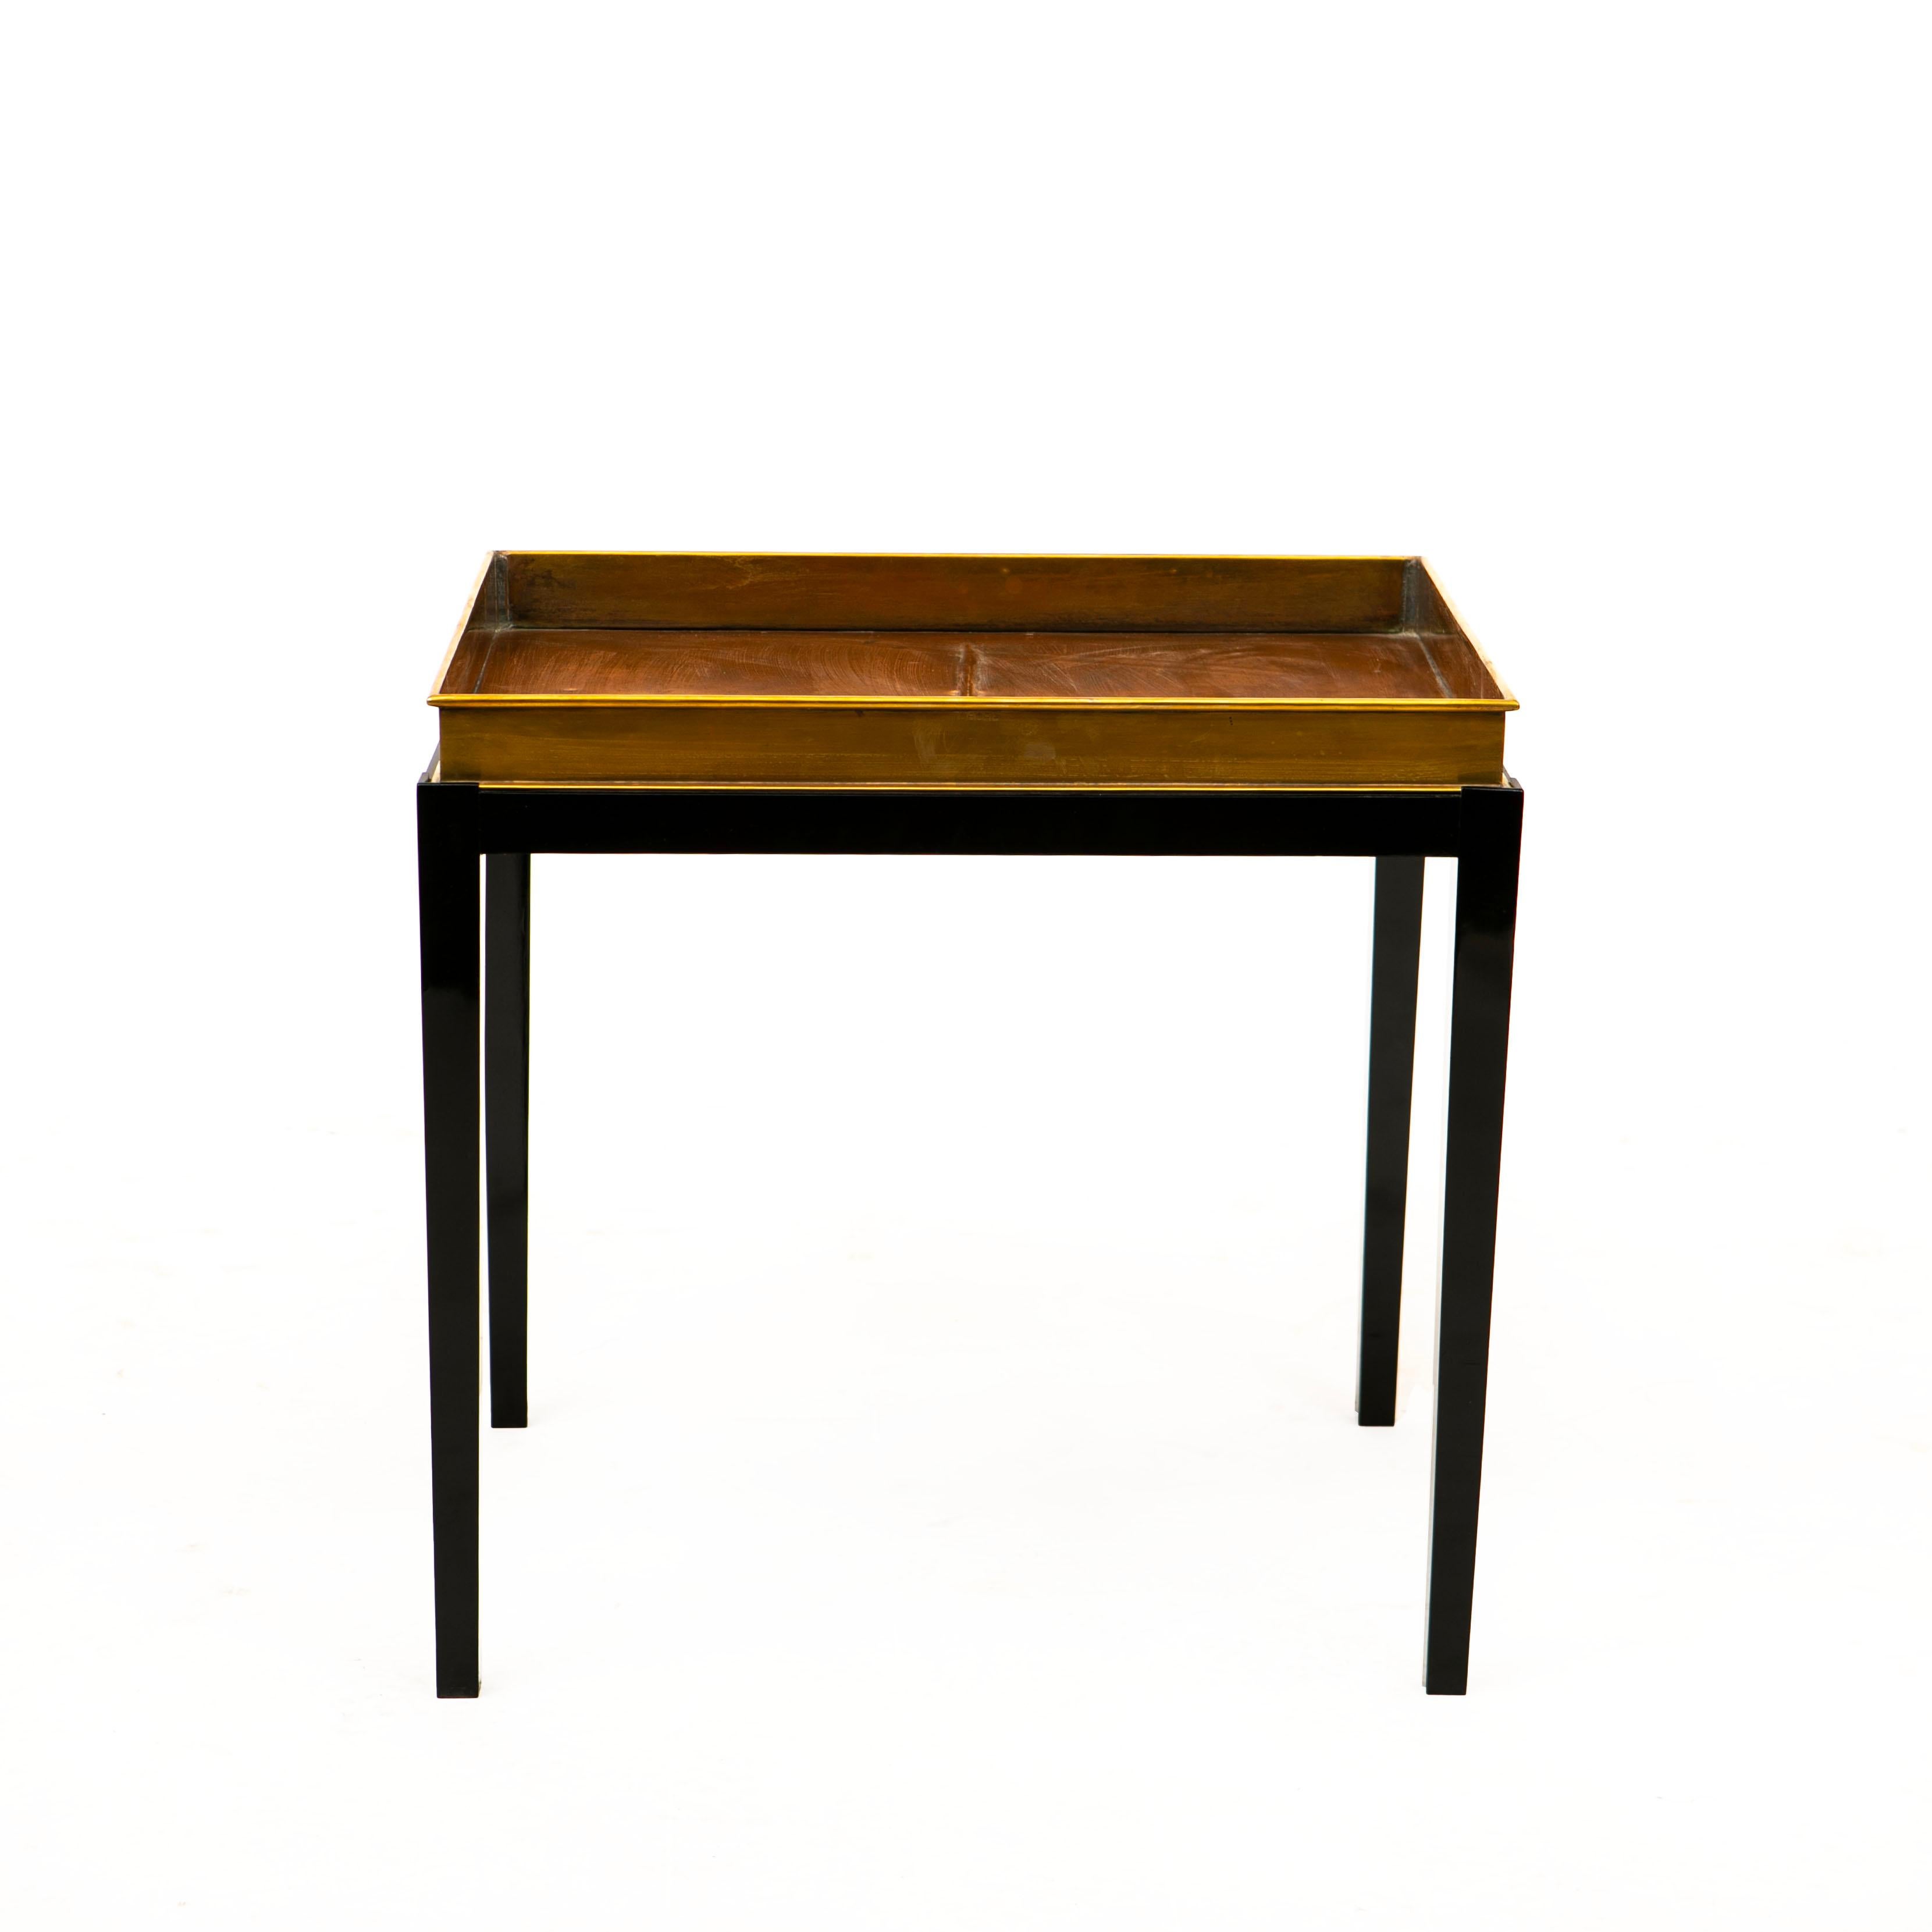 Danish Tray Table Brass / Copper Black Polished Base